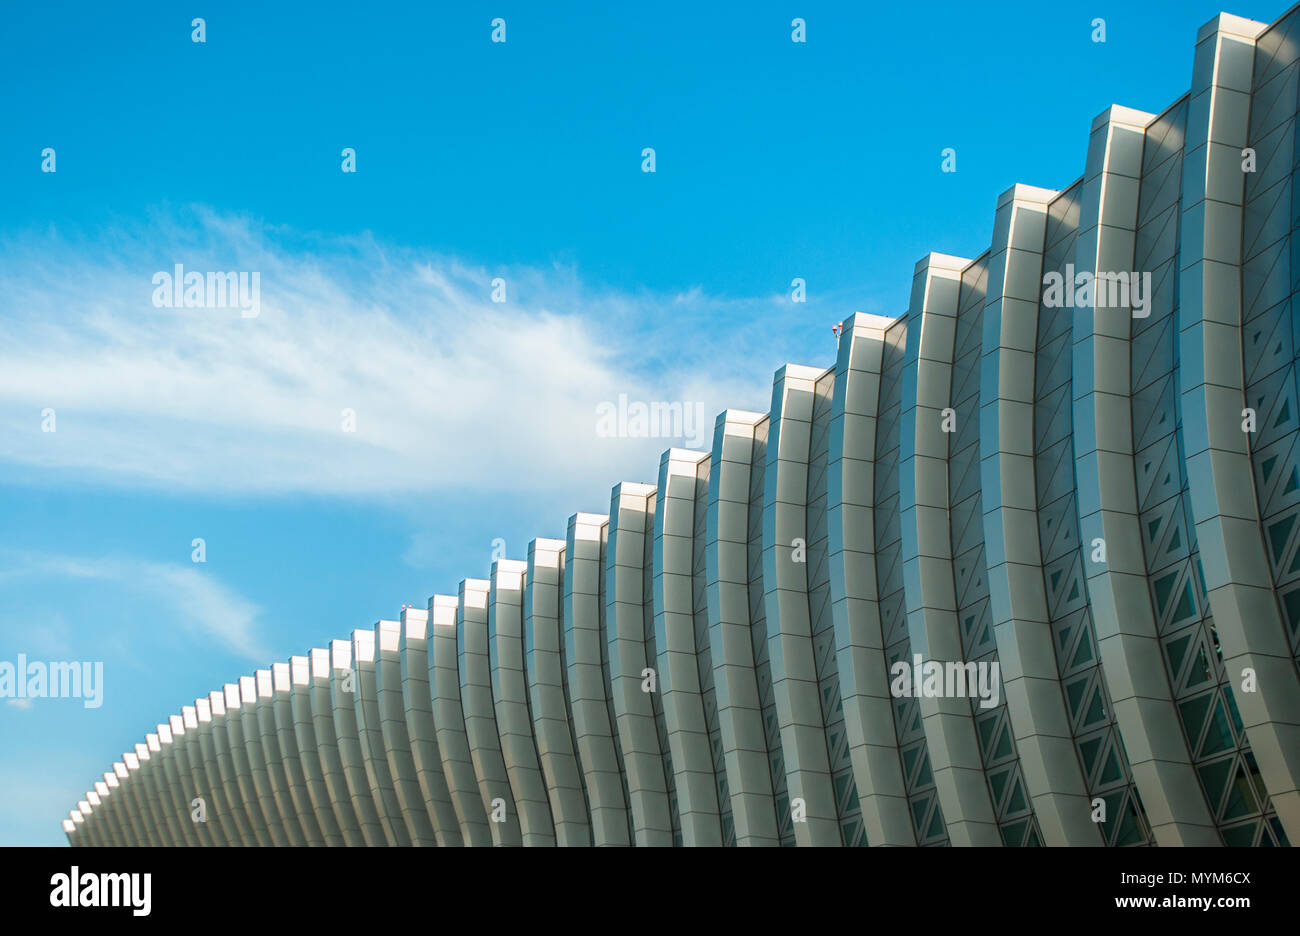 Contemporary geometric facade of a building with wavy lines. Stock Photo